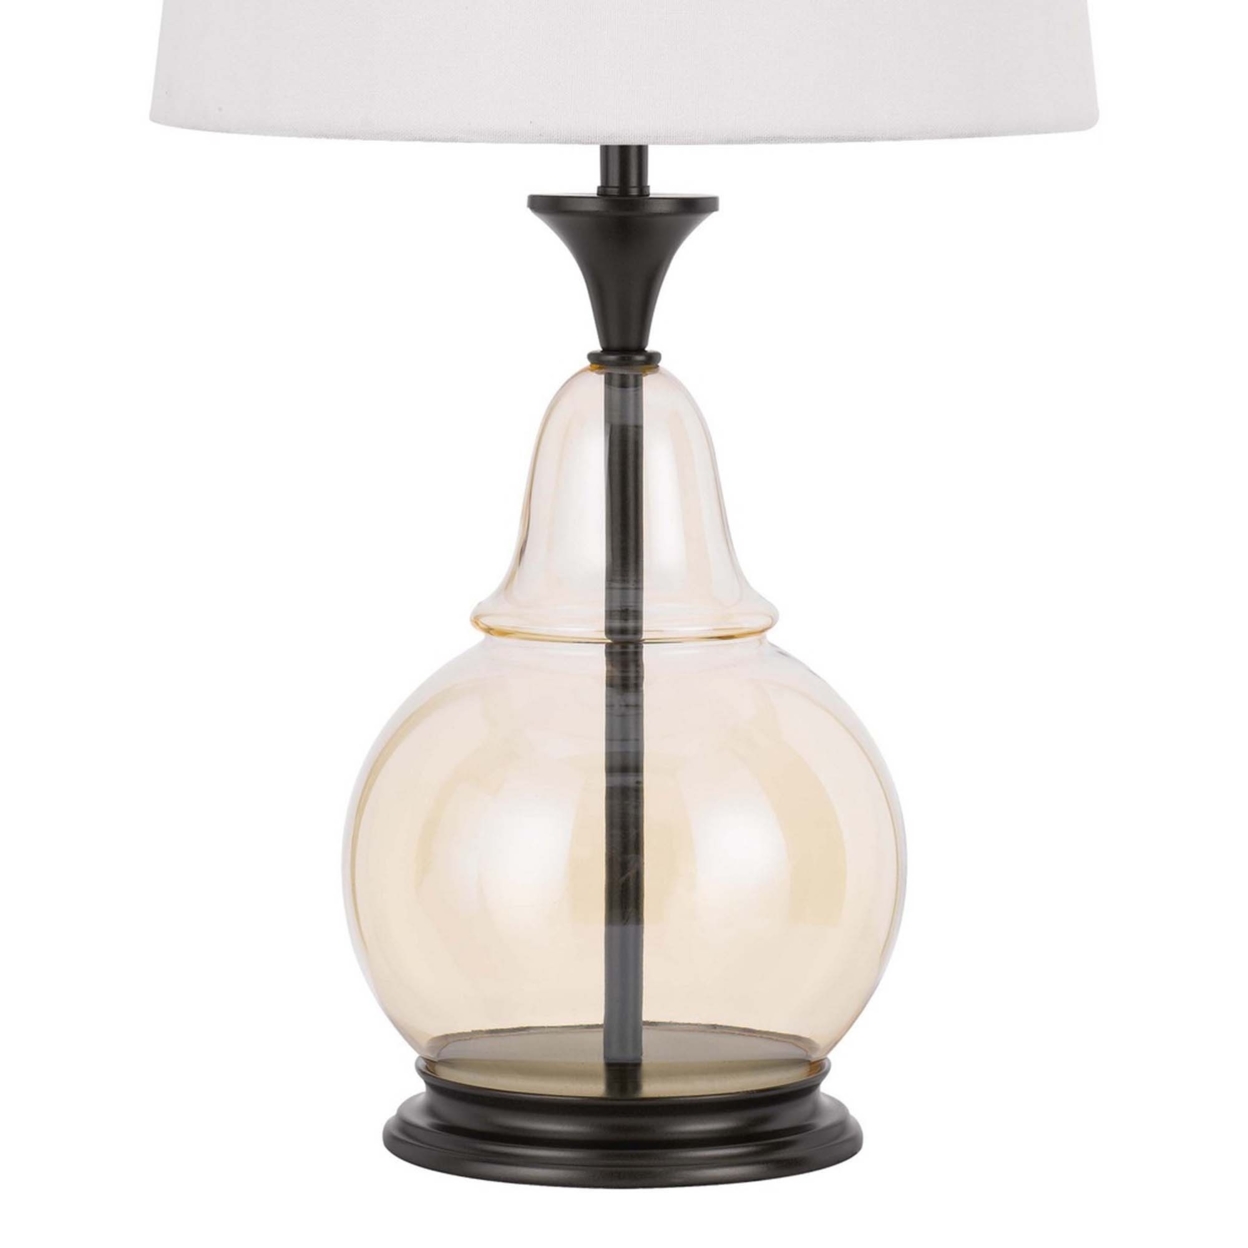 Table Lamp With Metal And Glass Jar Base, White And Bronze- Saltoro Sherpi